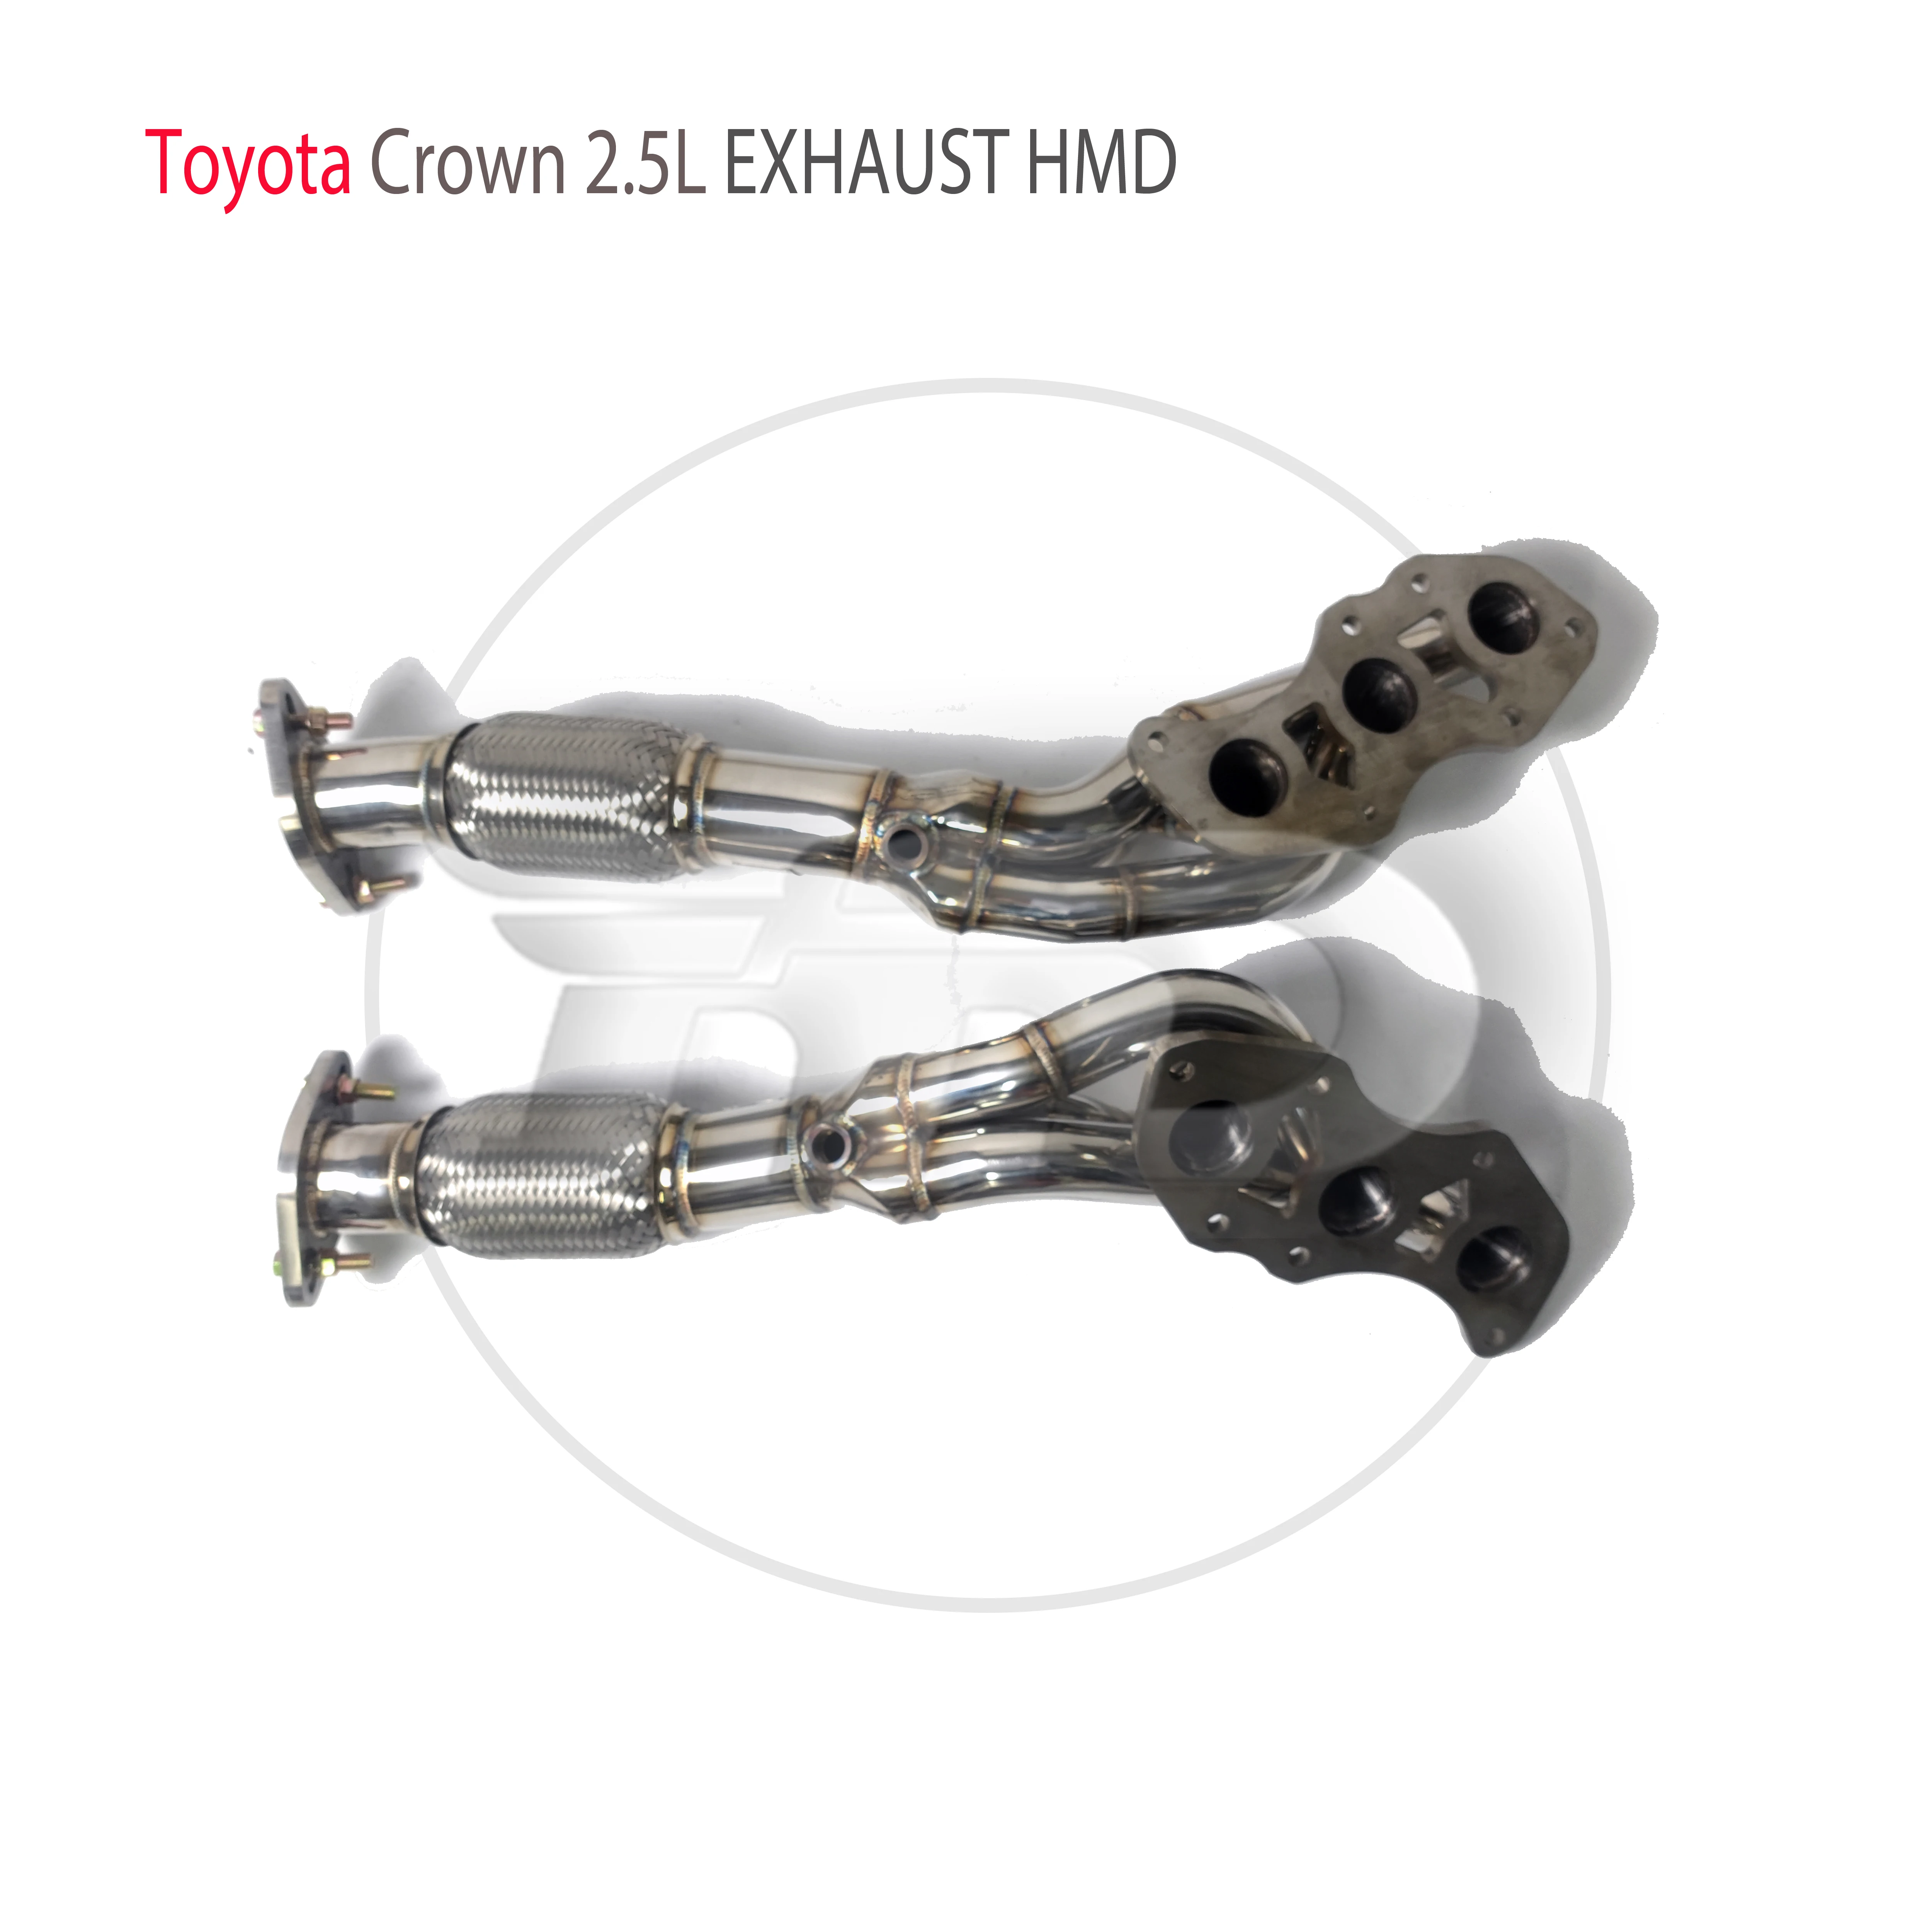 

HMD Exhaust Manifold High Flow Performance Downpipe for Toyota Crown 2.5L Car Accessories Catless Pipe